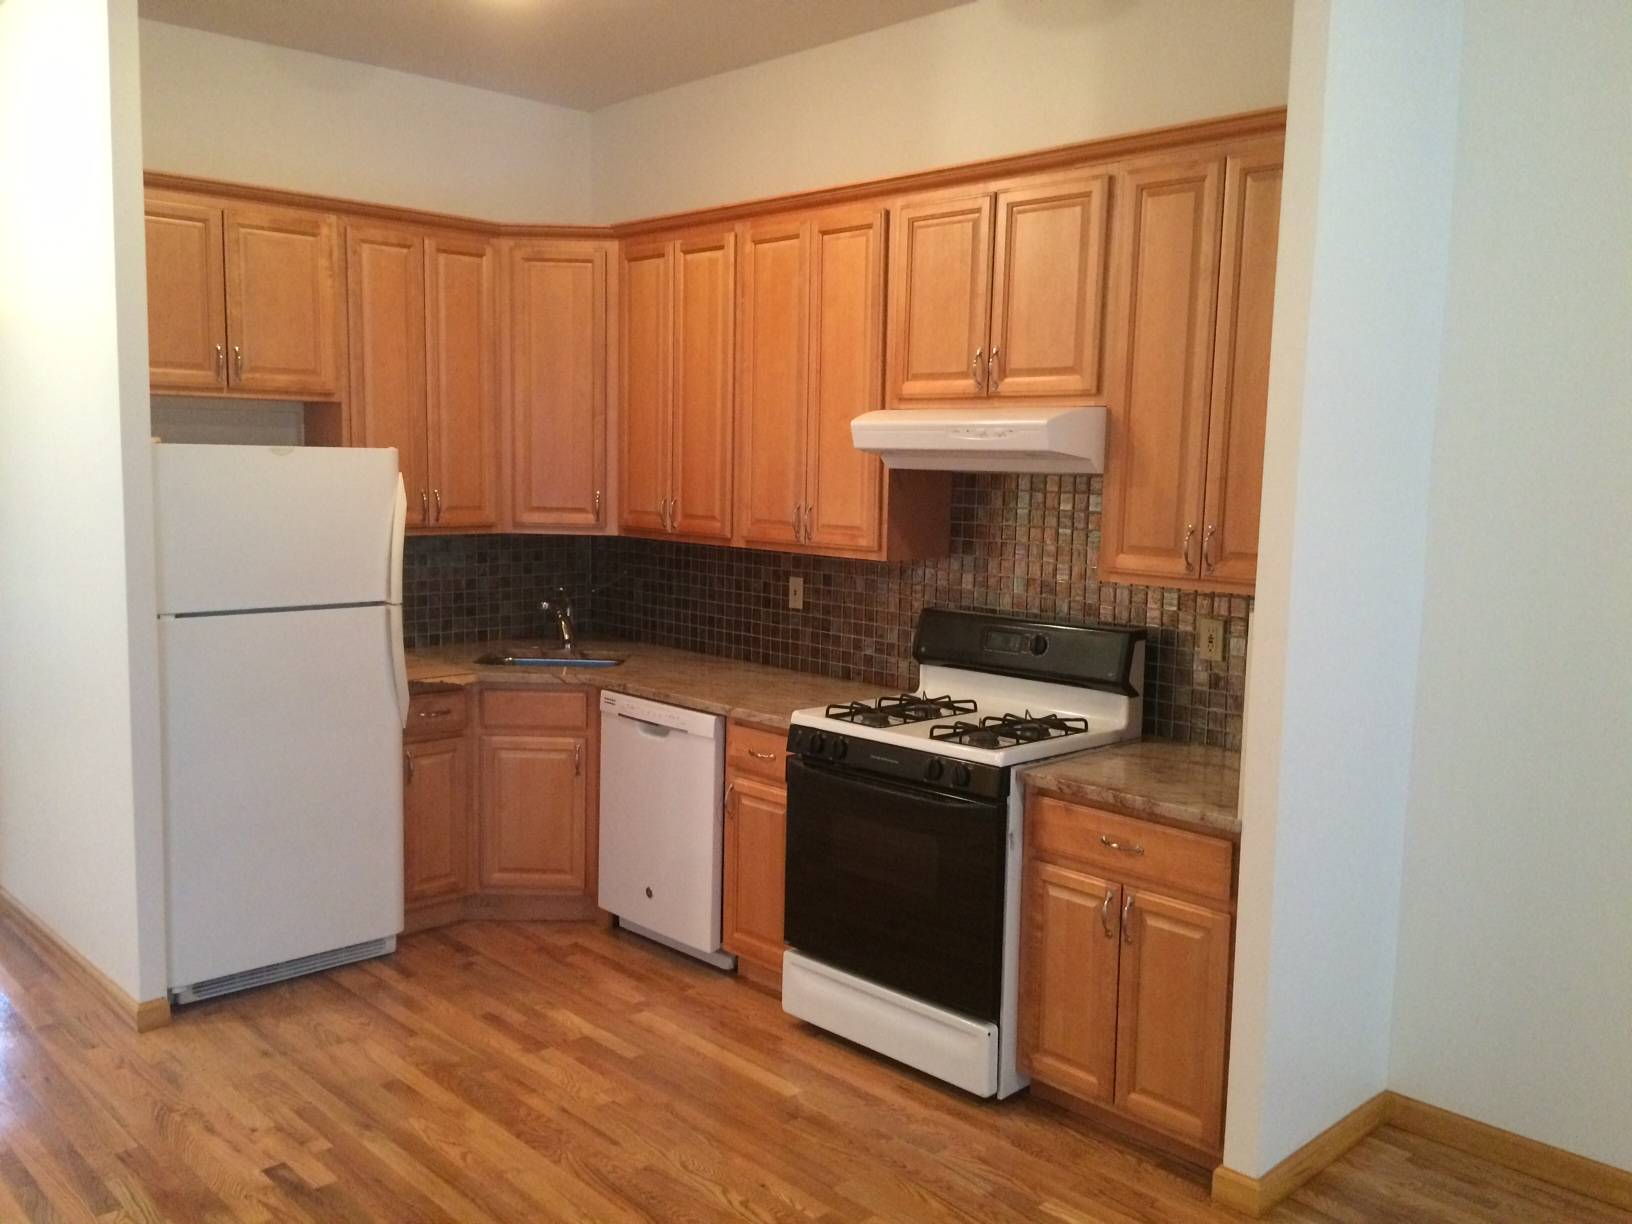 Fully Renovated 2 Bedroom 1 Bath Apartment in Greenpoint Jewel Street 1,000 sq ft